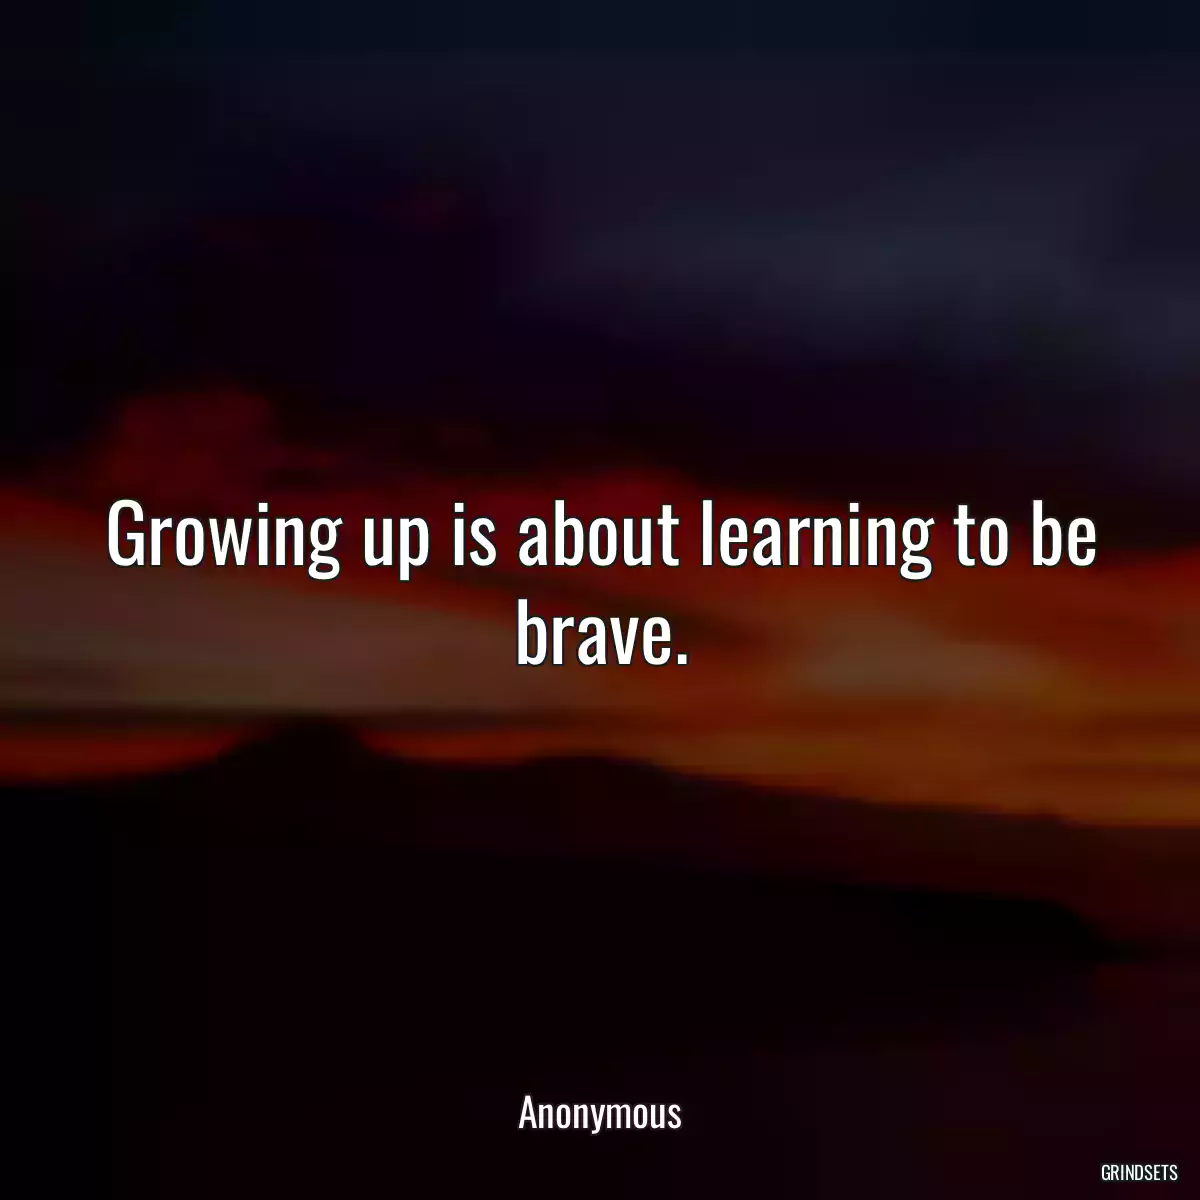 Growing up is about learning to be brave.